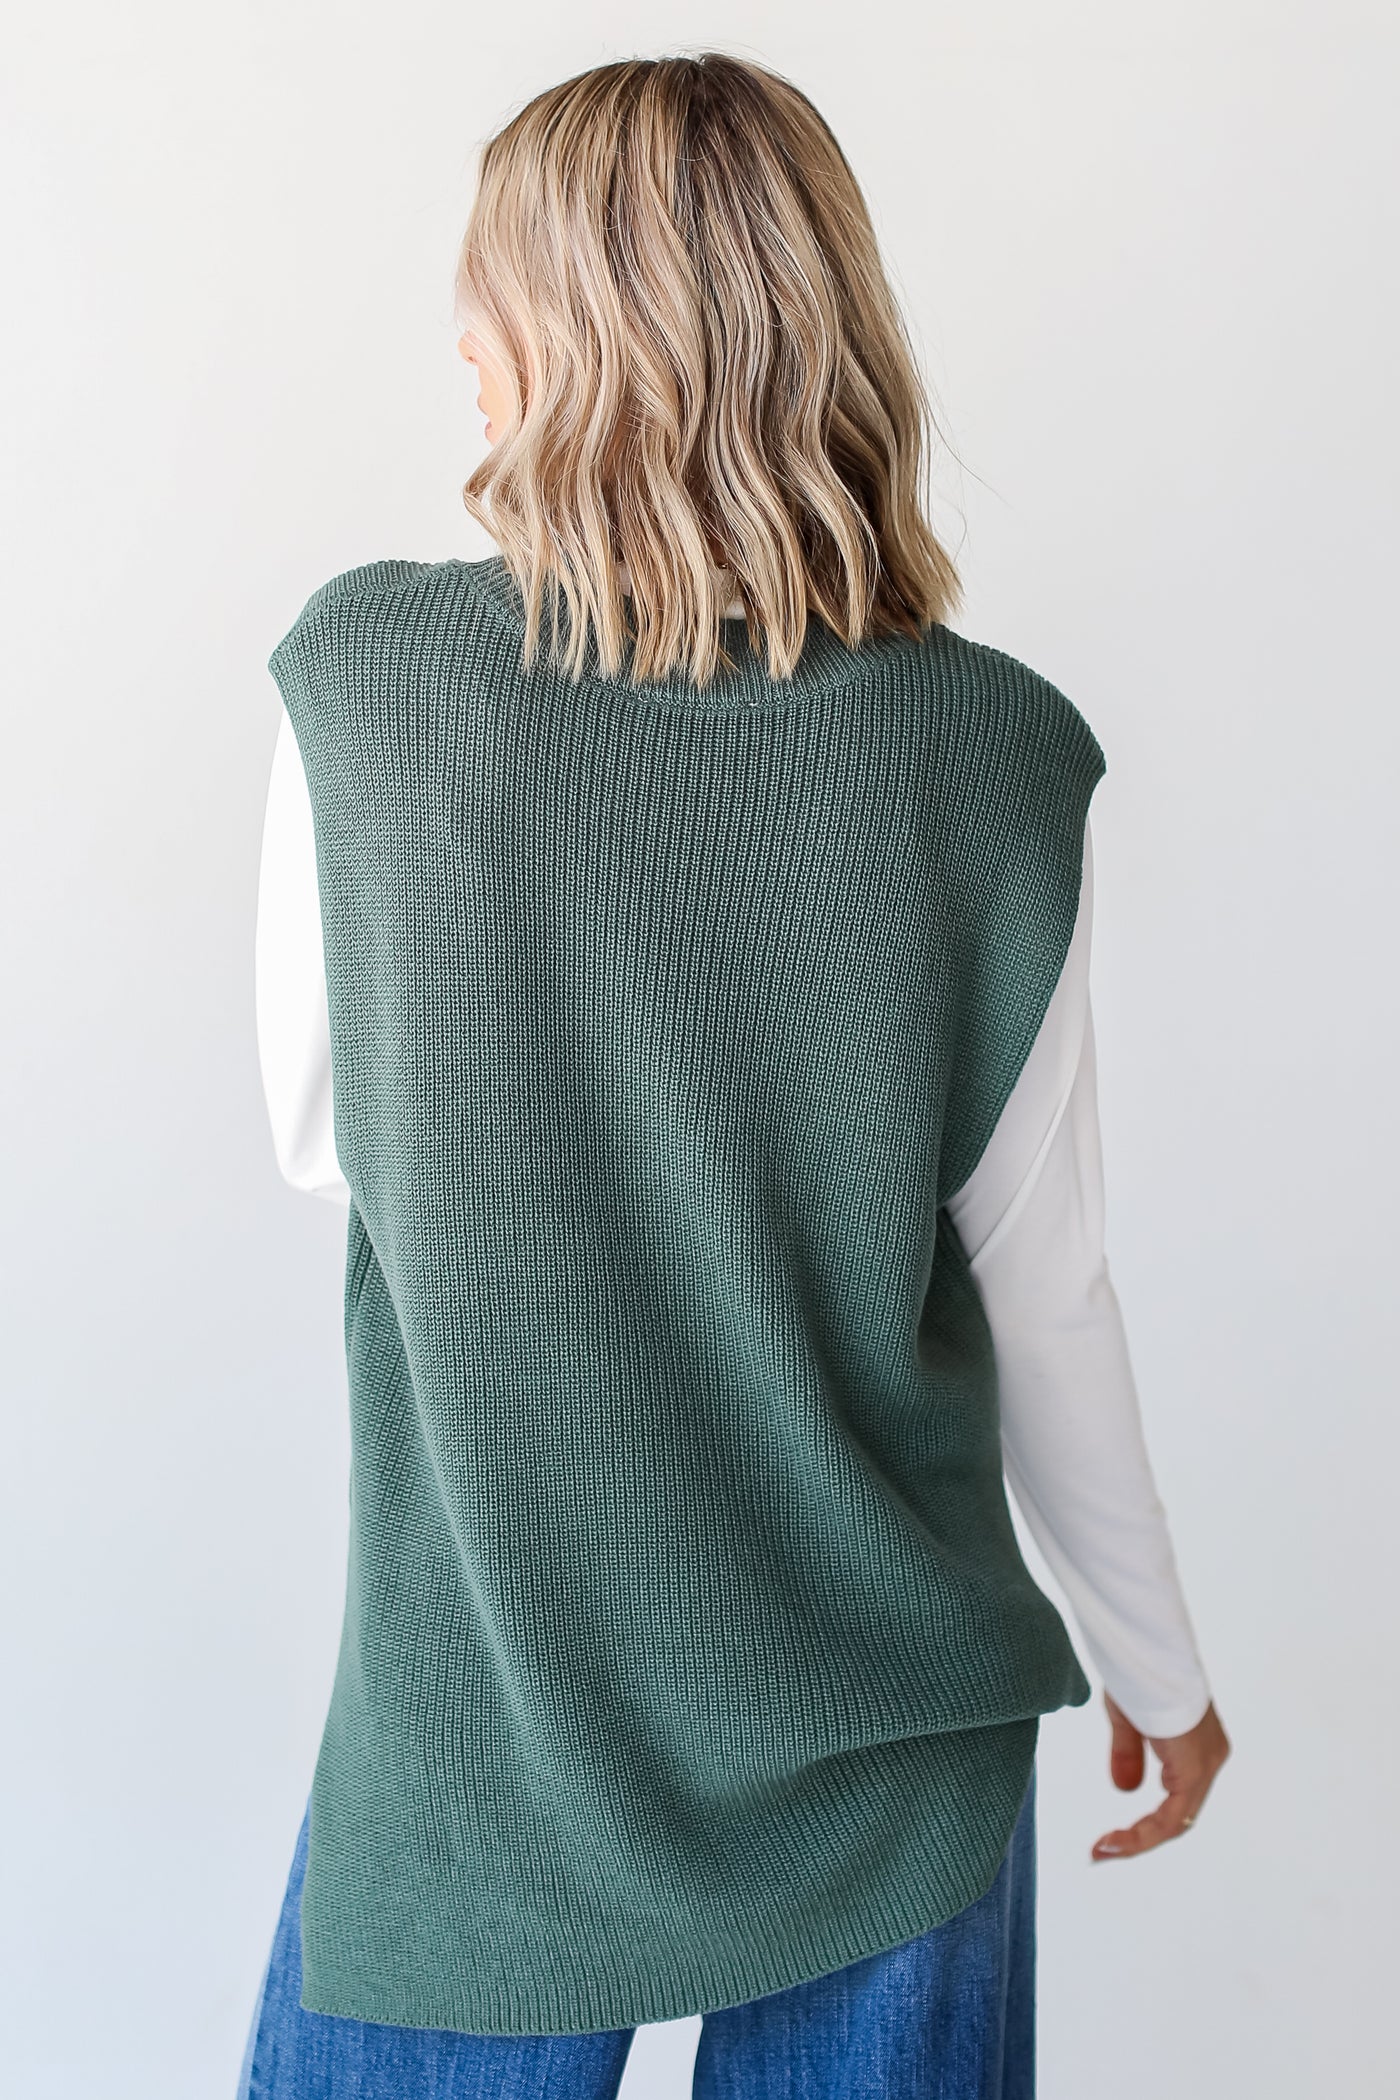 teal Oversized Sweater Vest back view